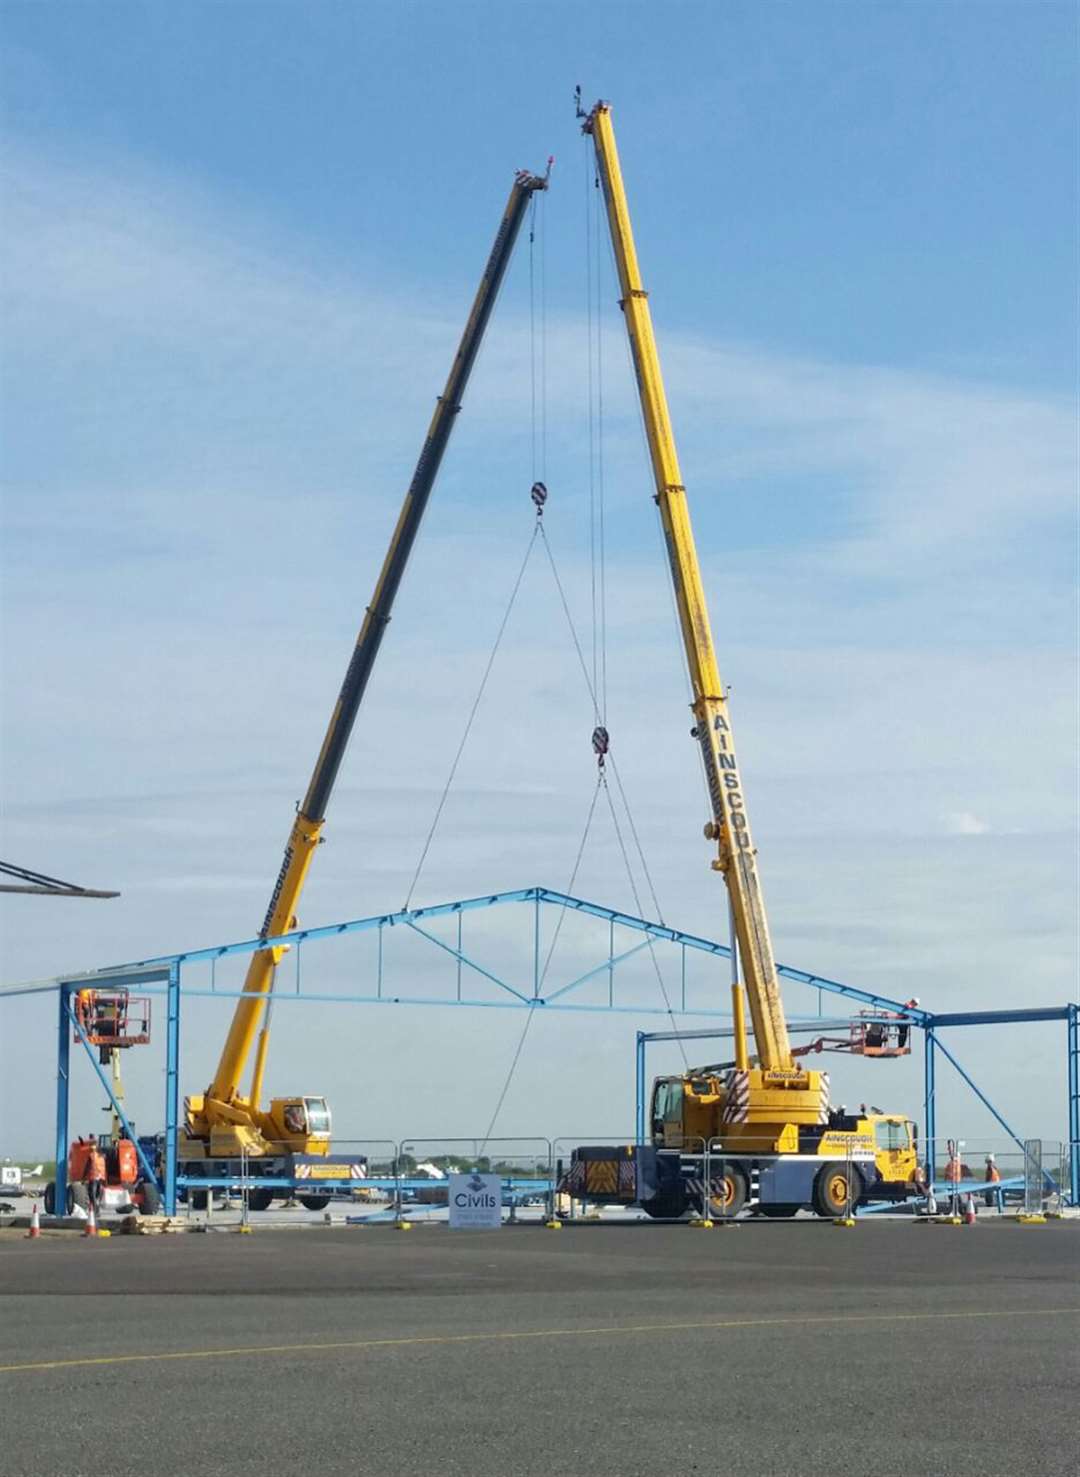 The new hangar being built at Lydd Airport